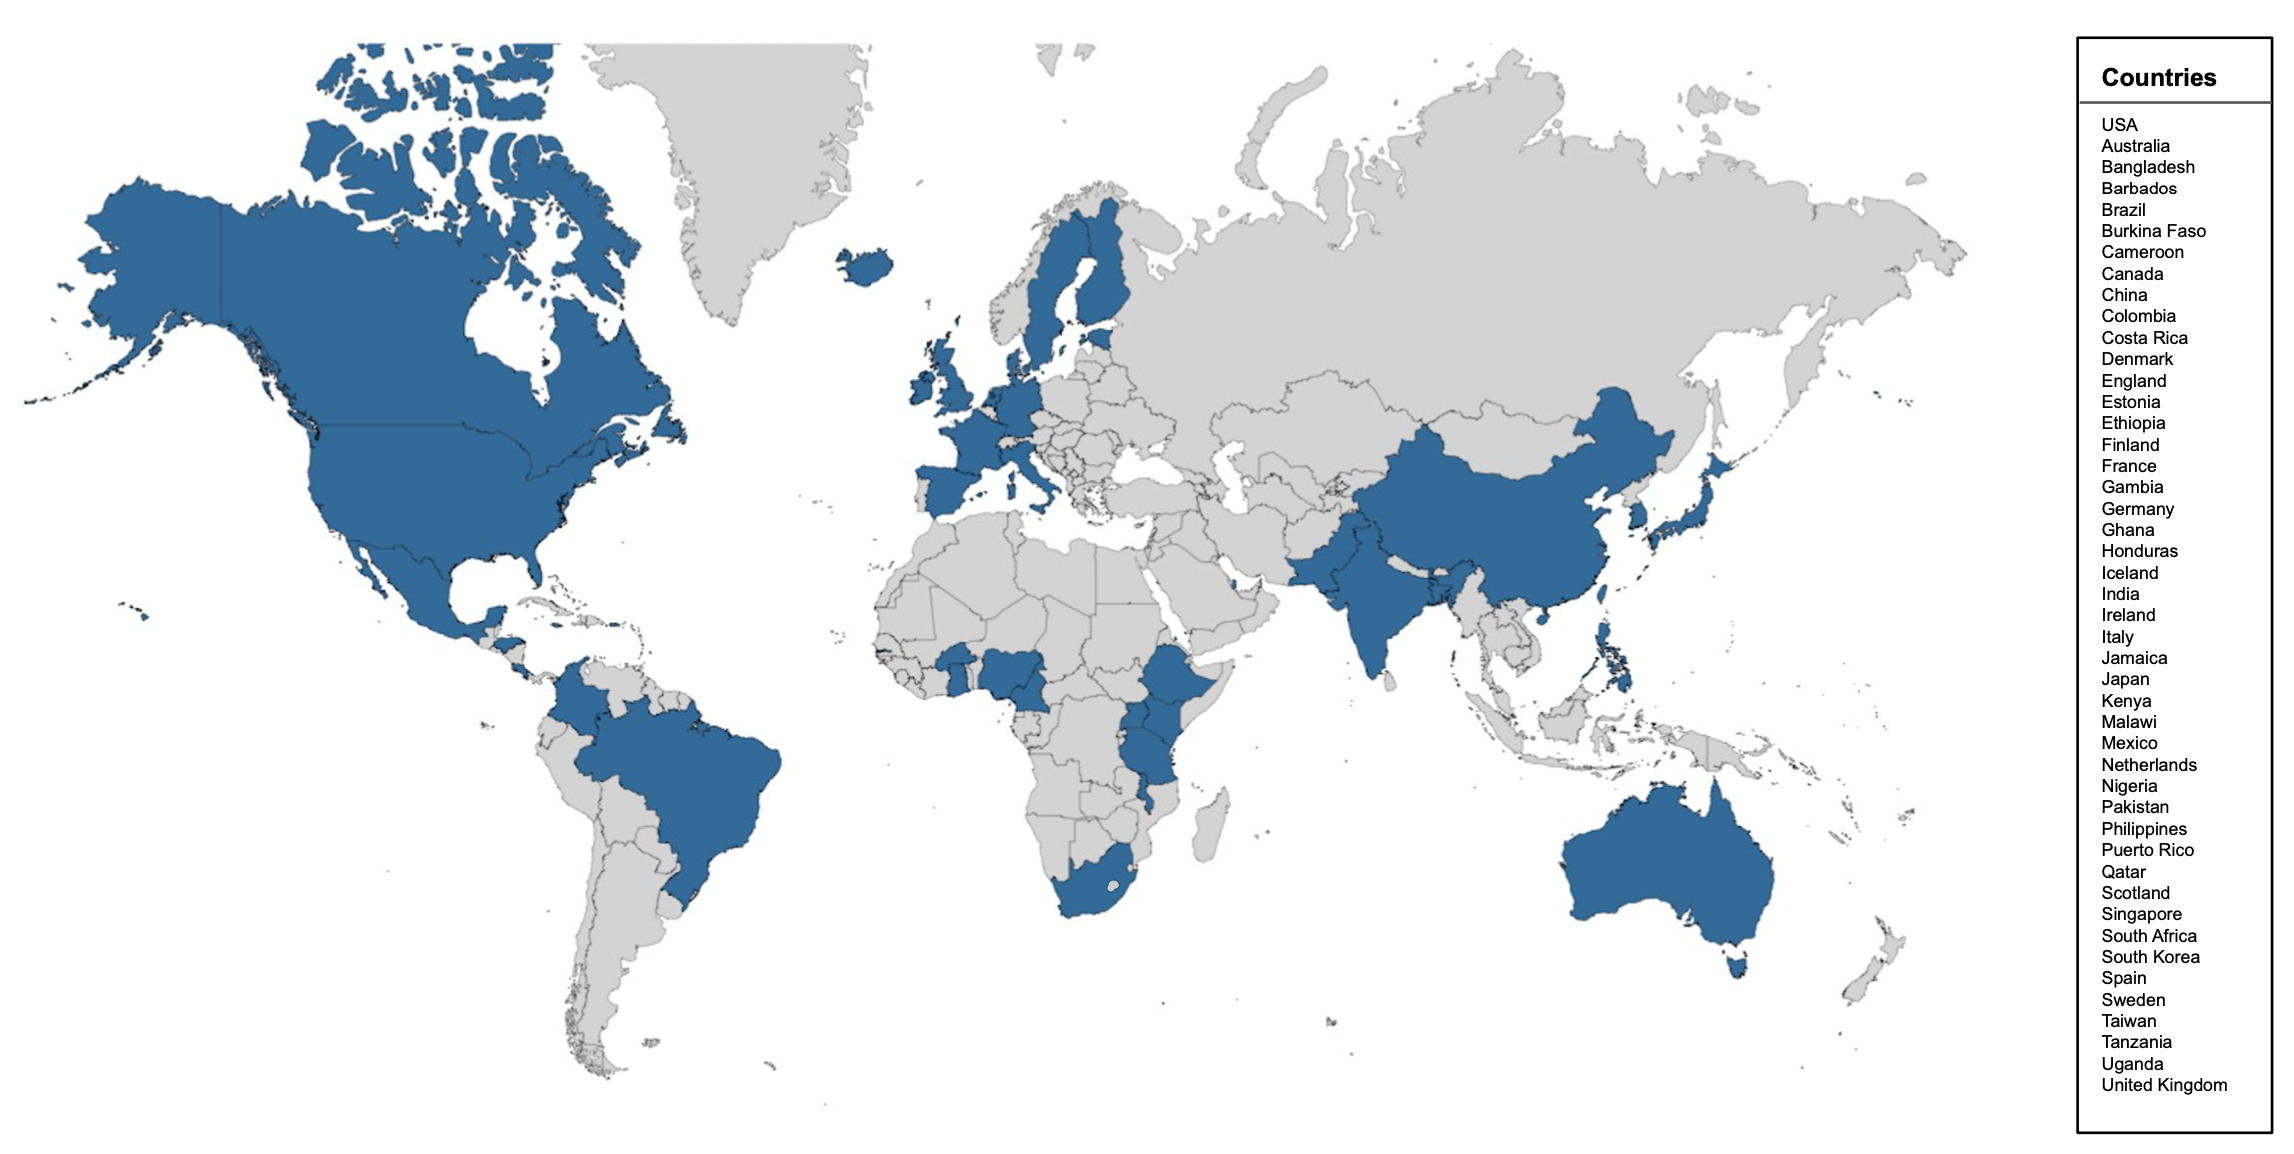 Blue shading indicates countries from which participants were recruited across the datasets proposed by PRIMED Consortium study sites.